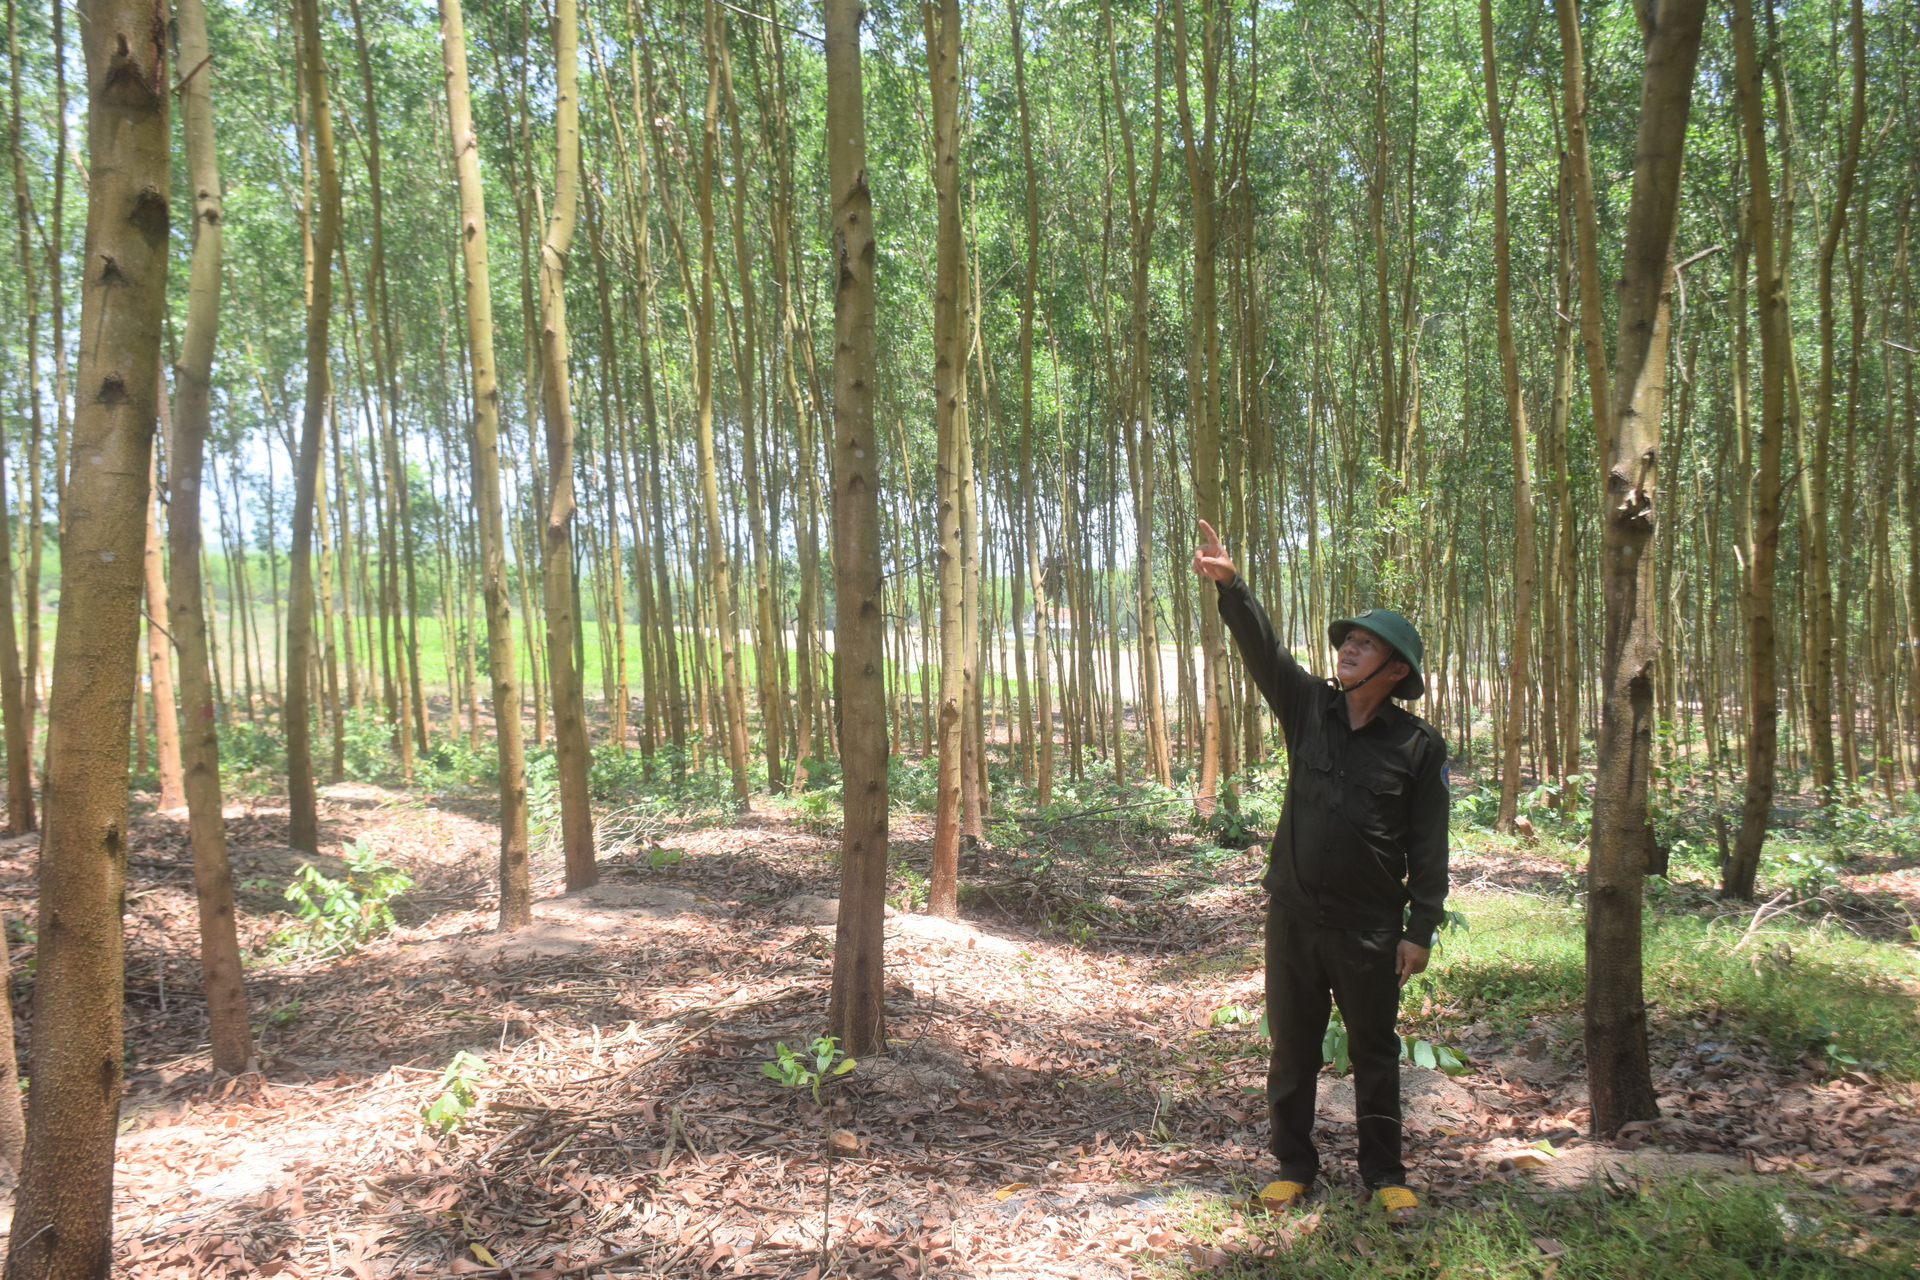 Binh Dinh strives to have 30,000 hectares of large timber forests by 2030. Photo: V.D.T.